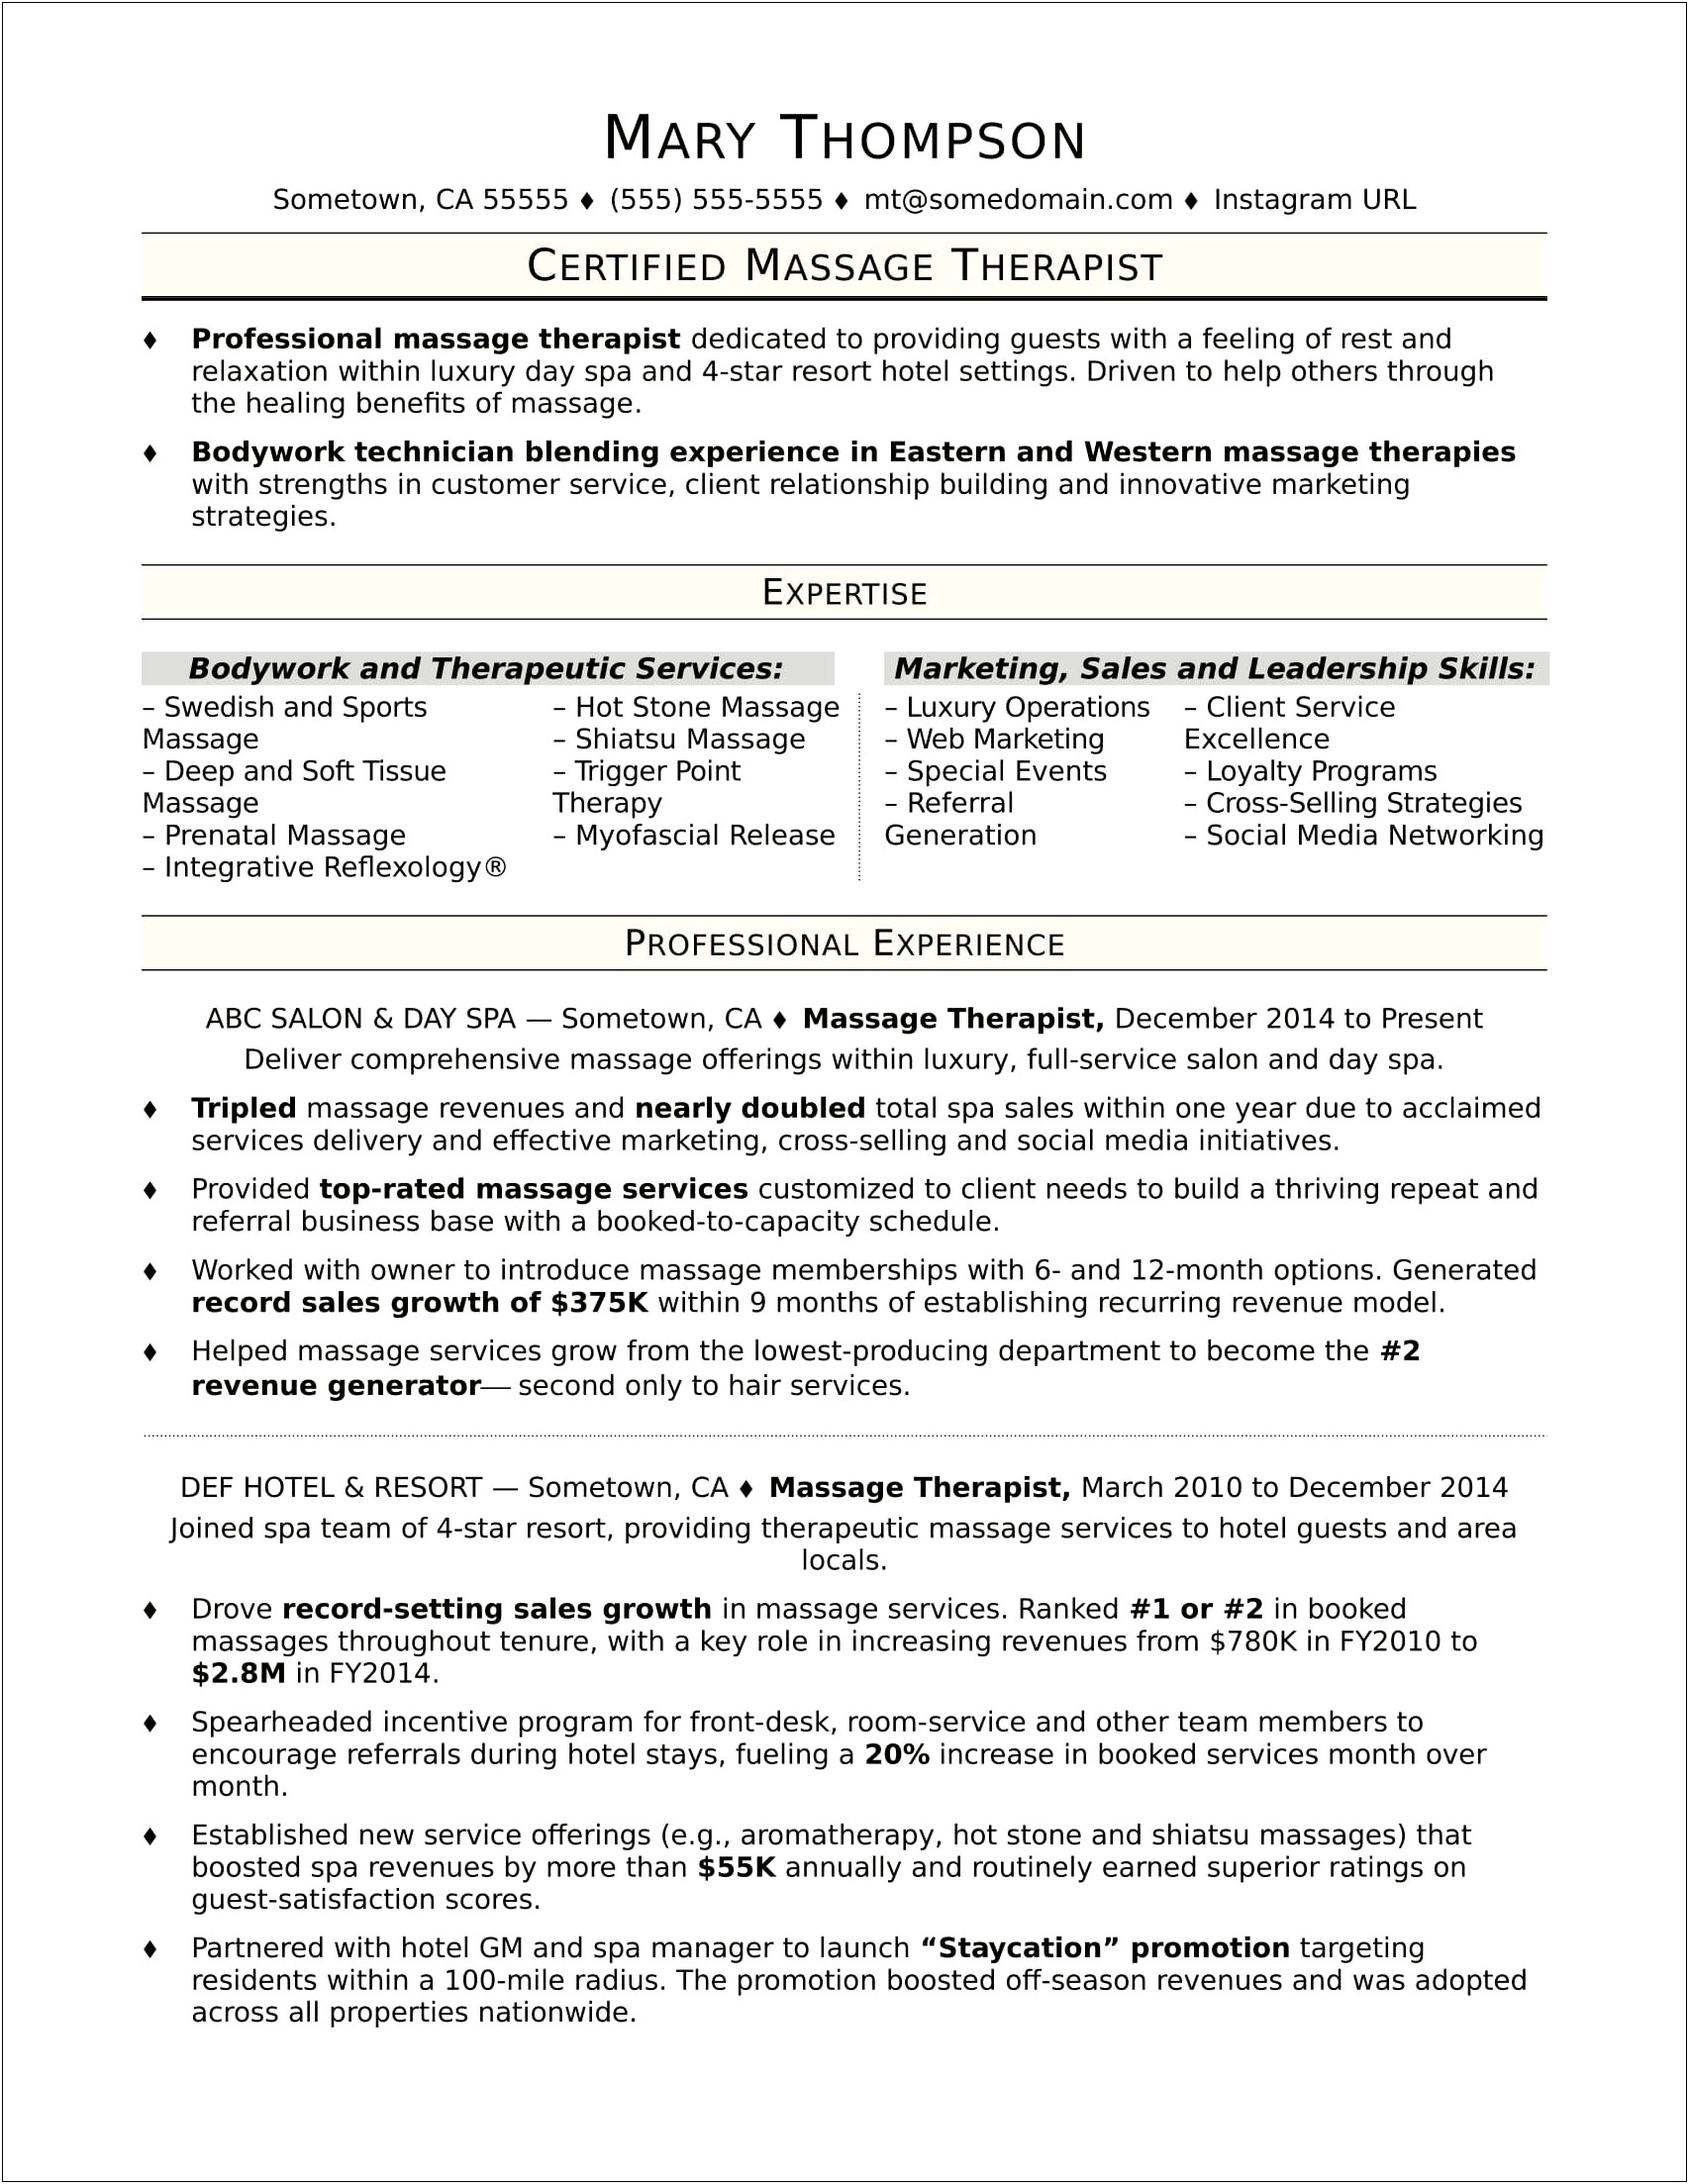 Sample Resume For Massage Therapist With No Experience